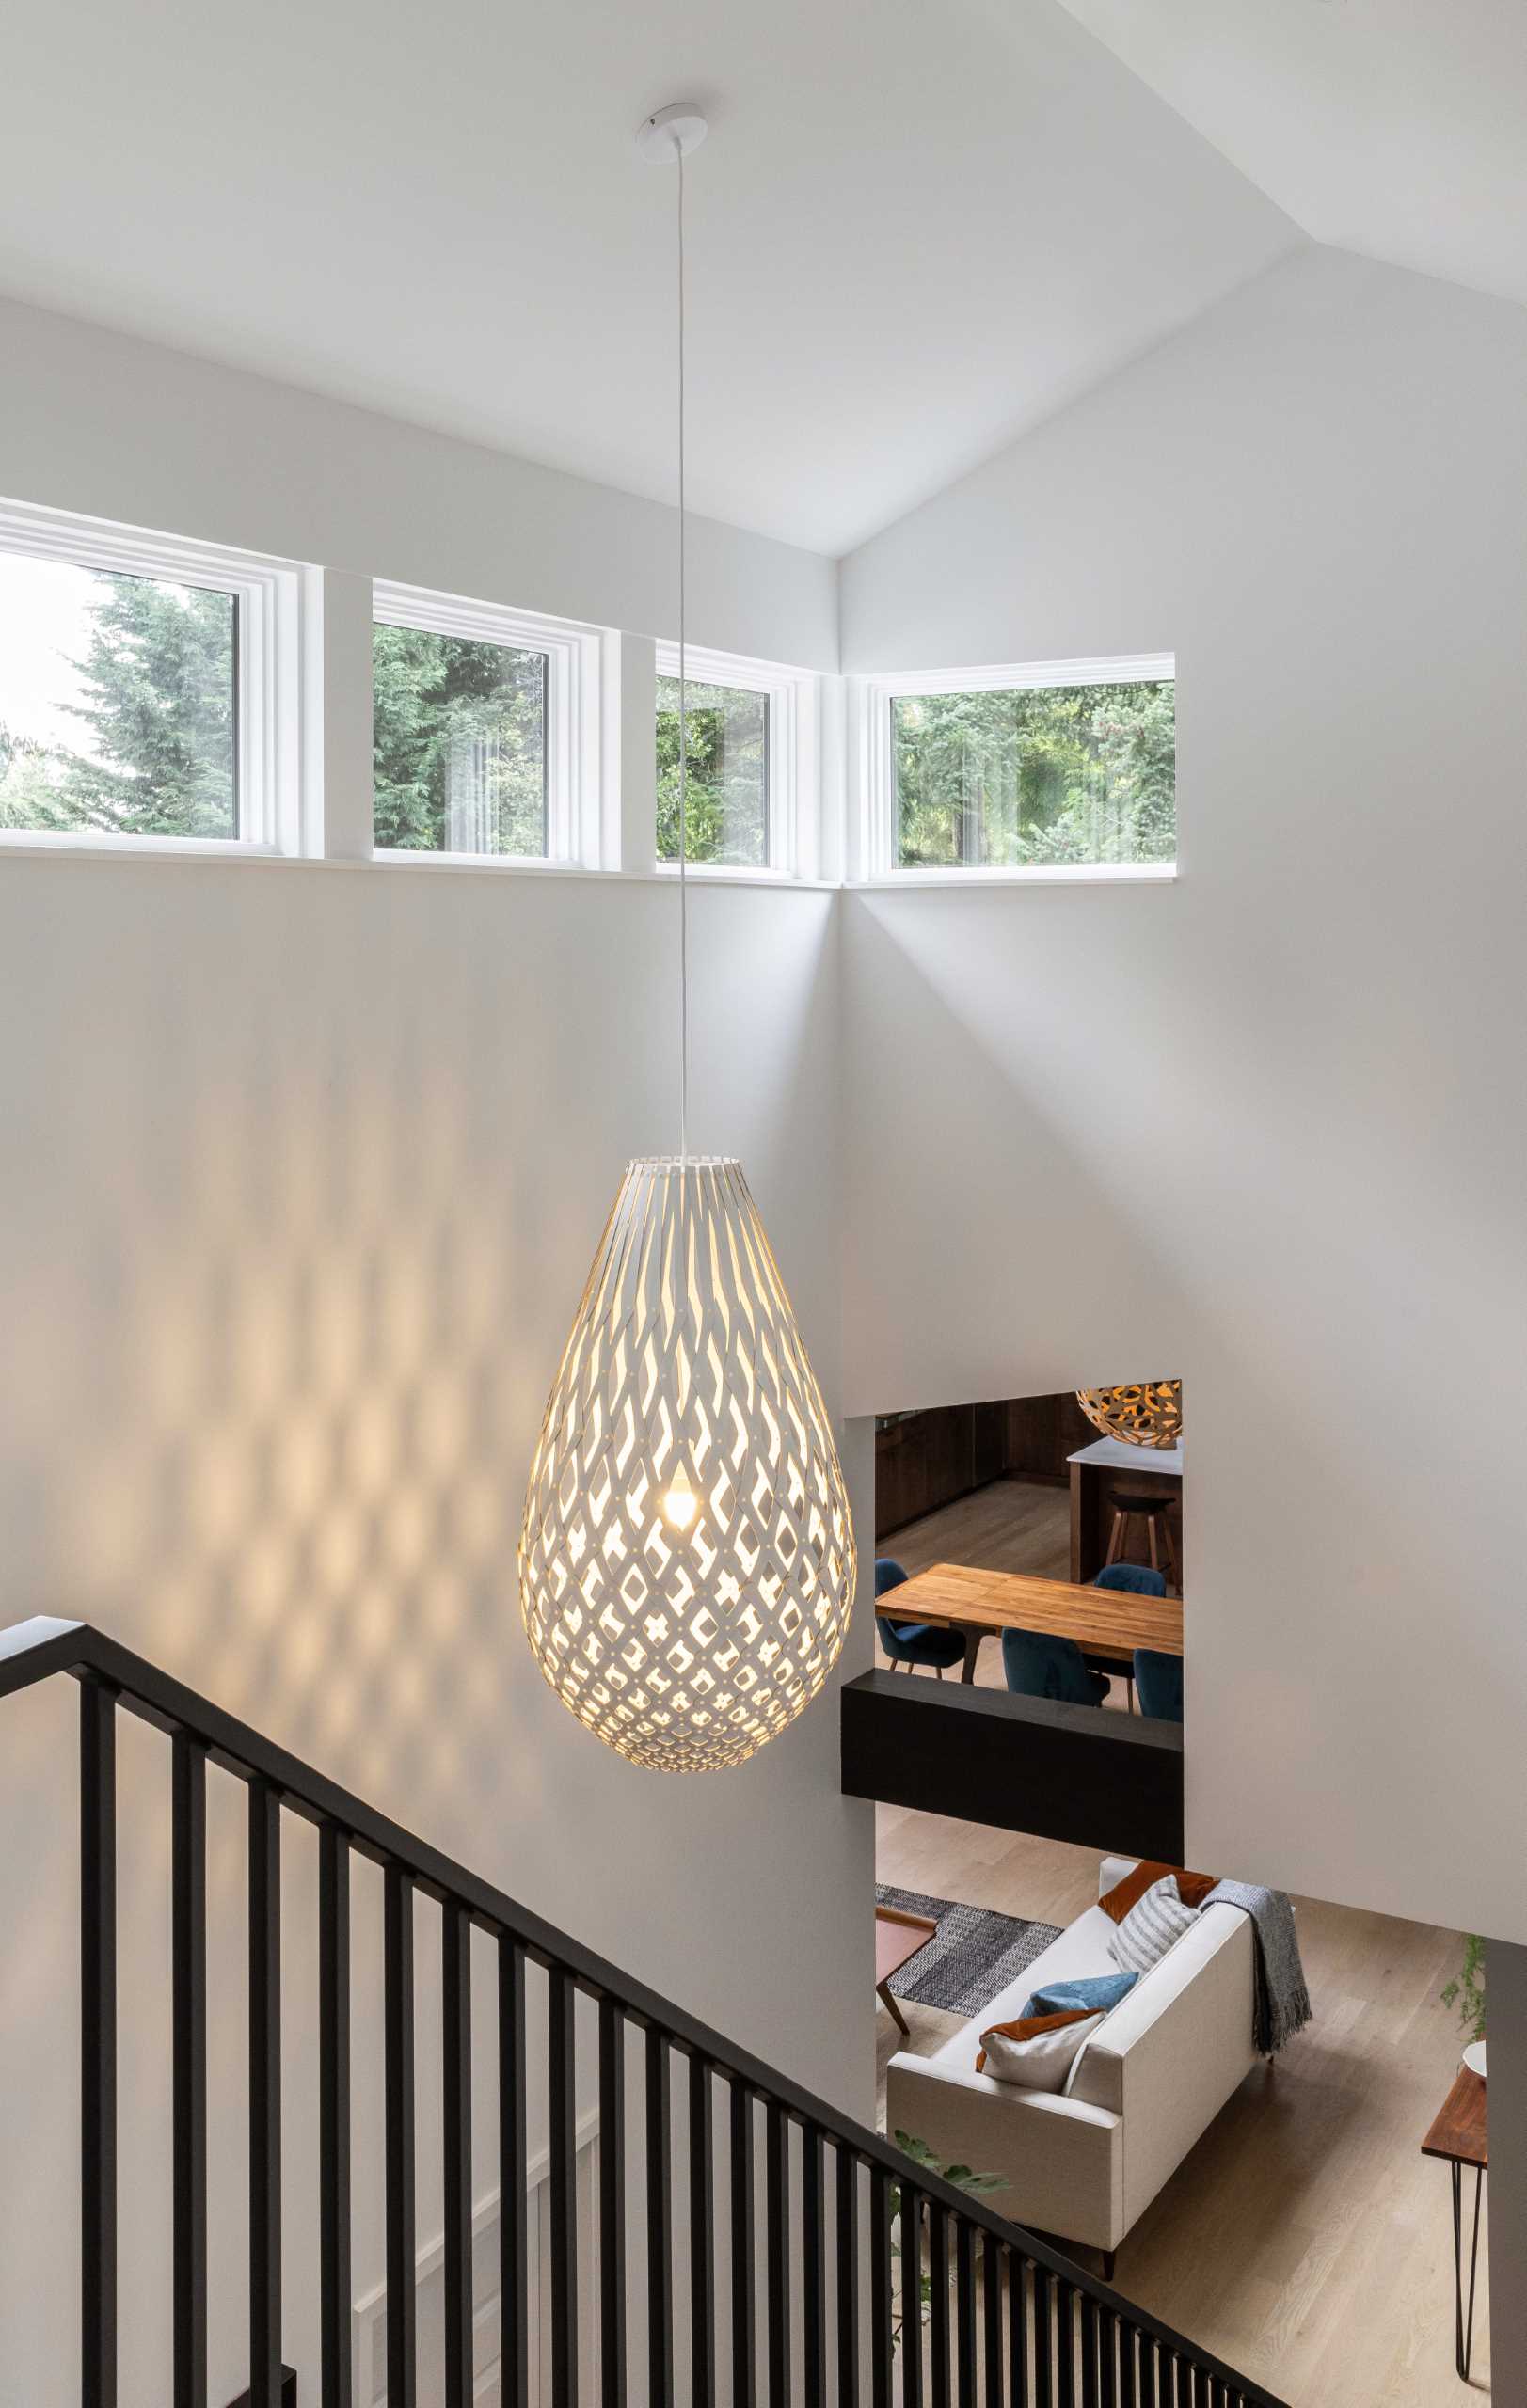 This staircase features a large sculptural pendant light and natural light from a row of windows.